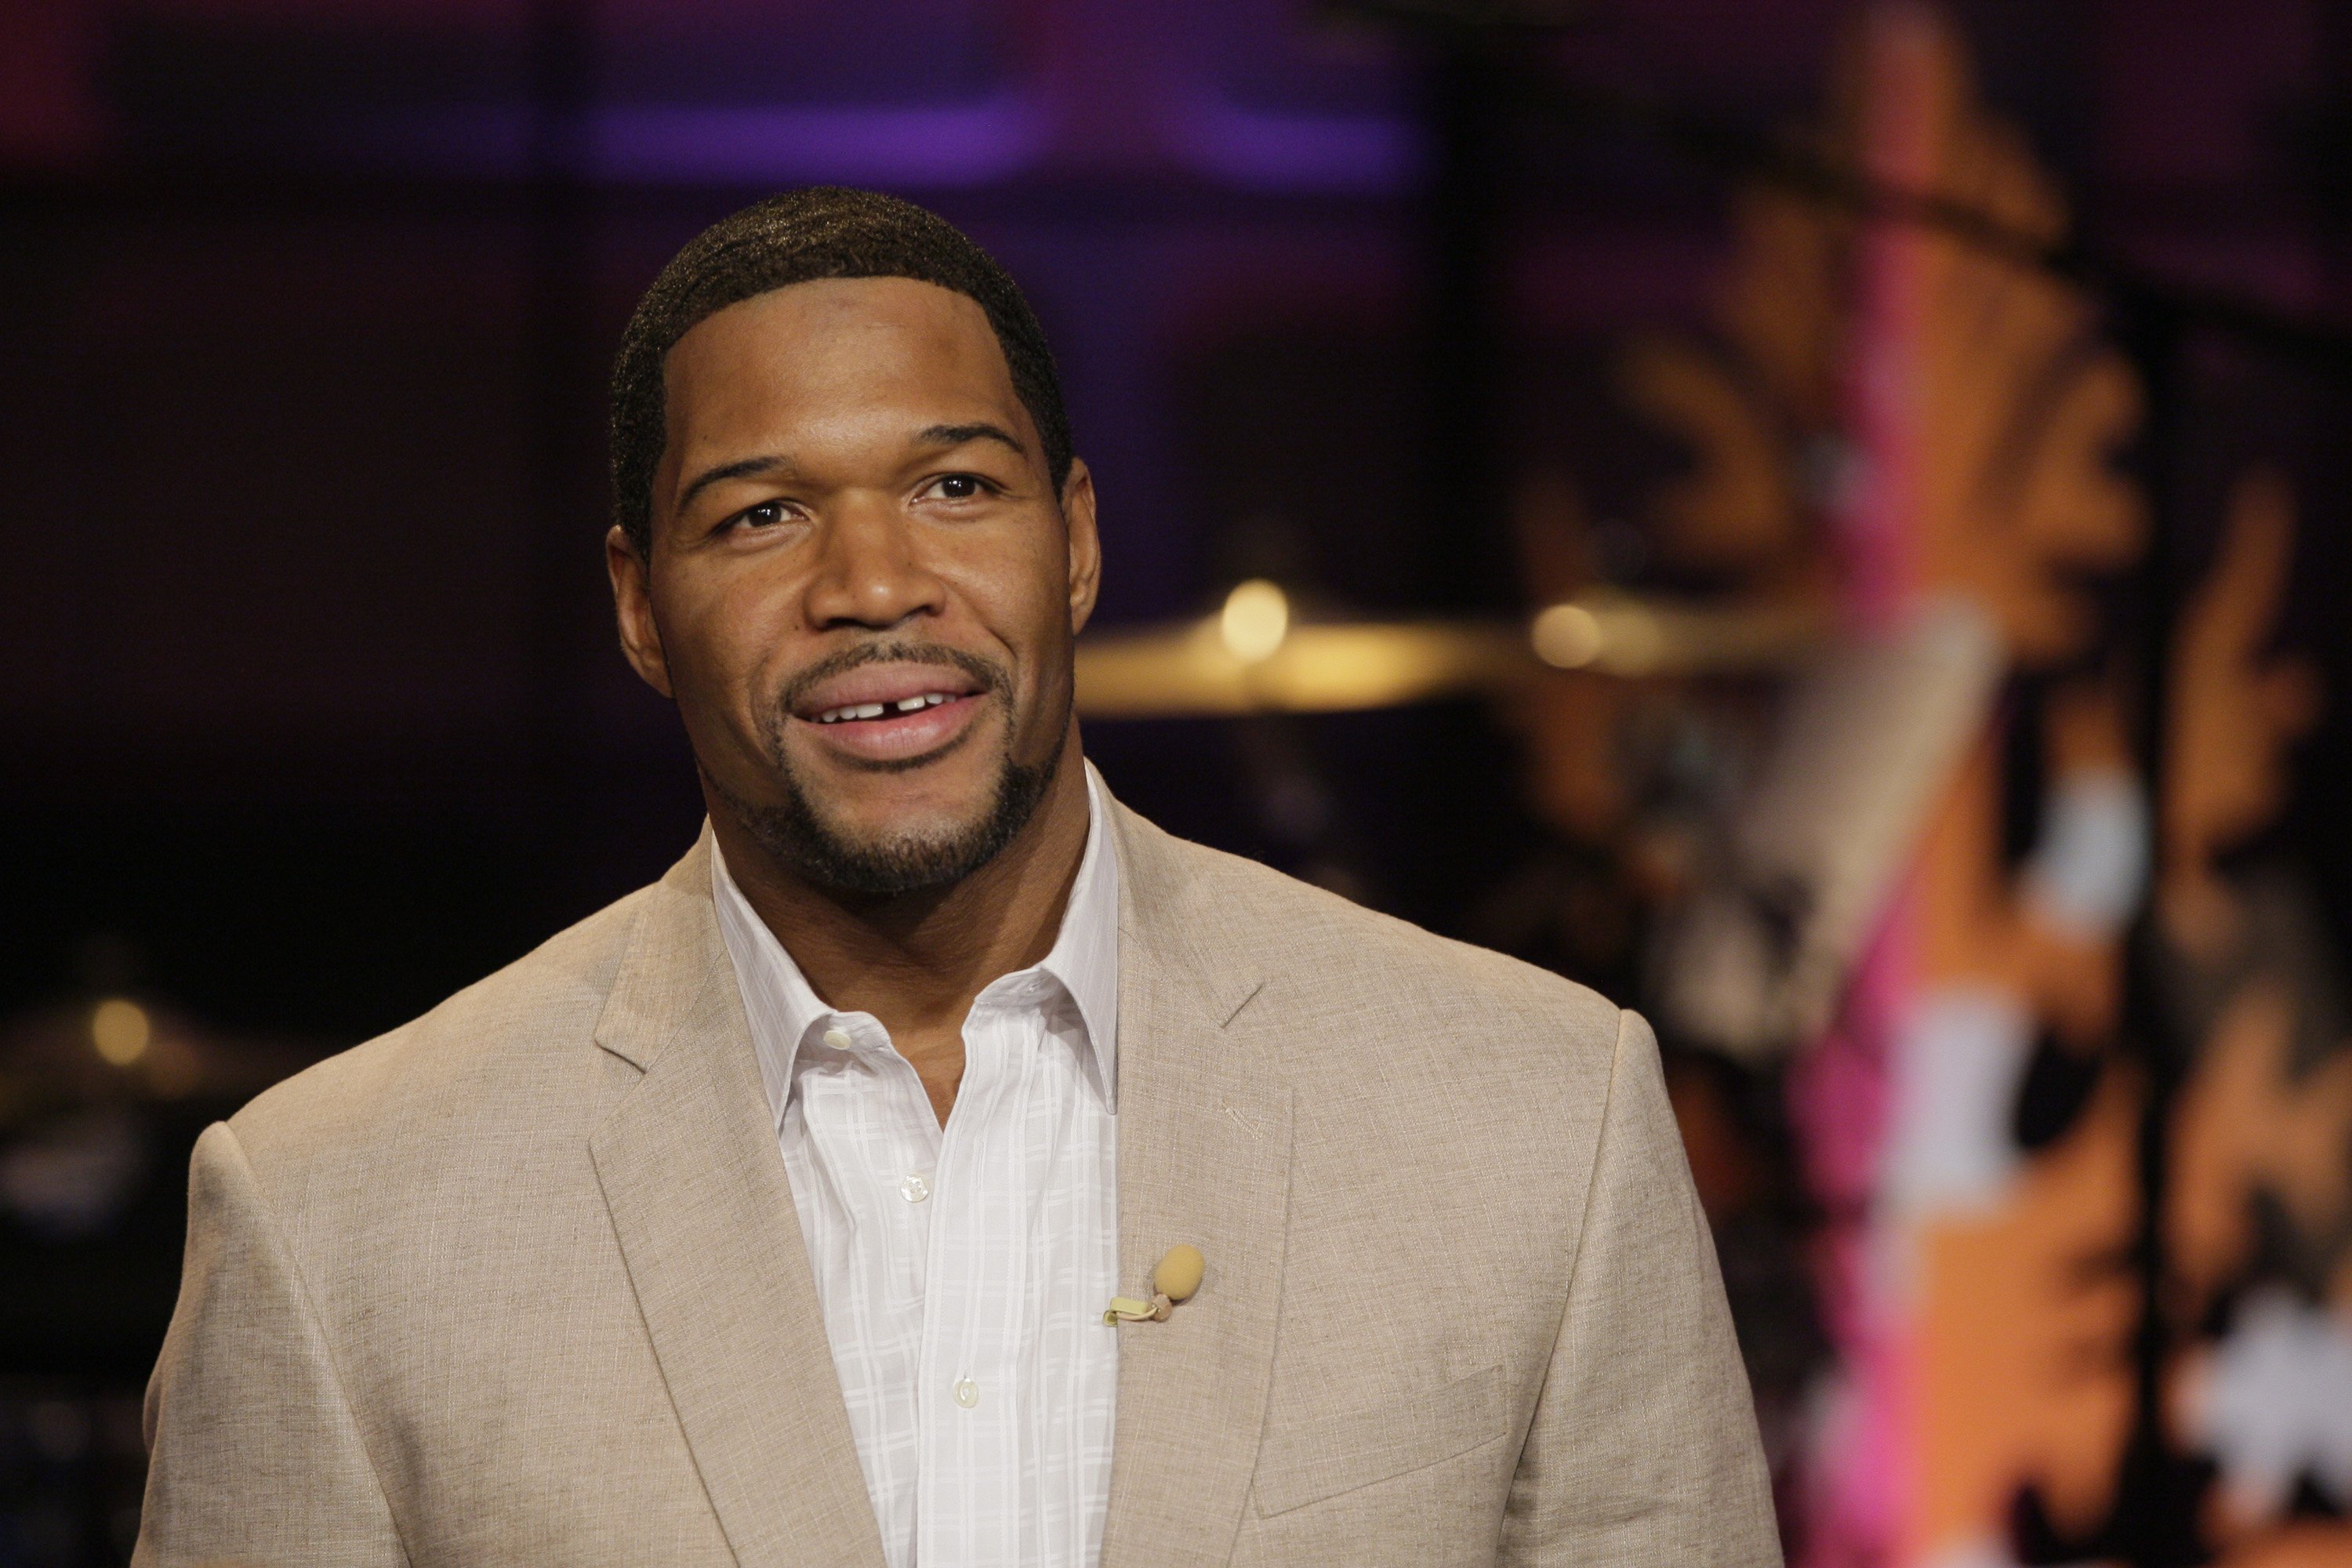 Former football player Michael Strahan on "The Tonight Show with Jay Leno" Season 22 on December 20, 2013 | Source: Getty Images